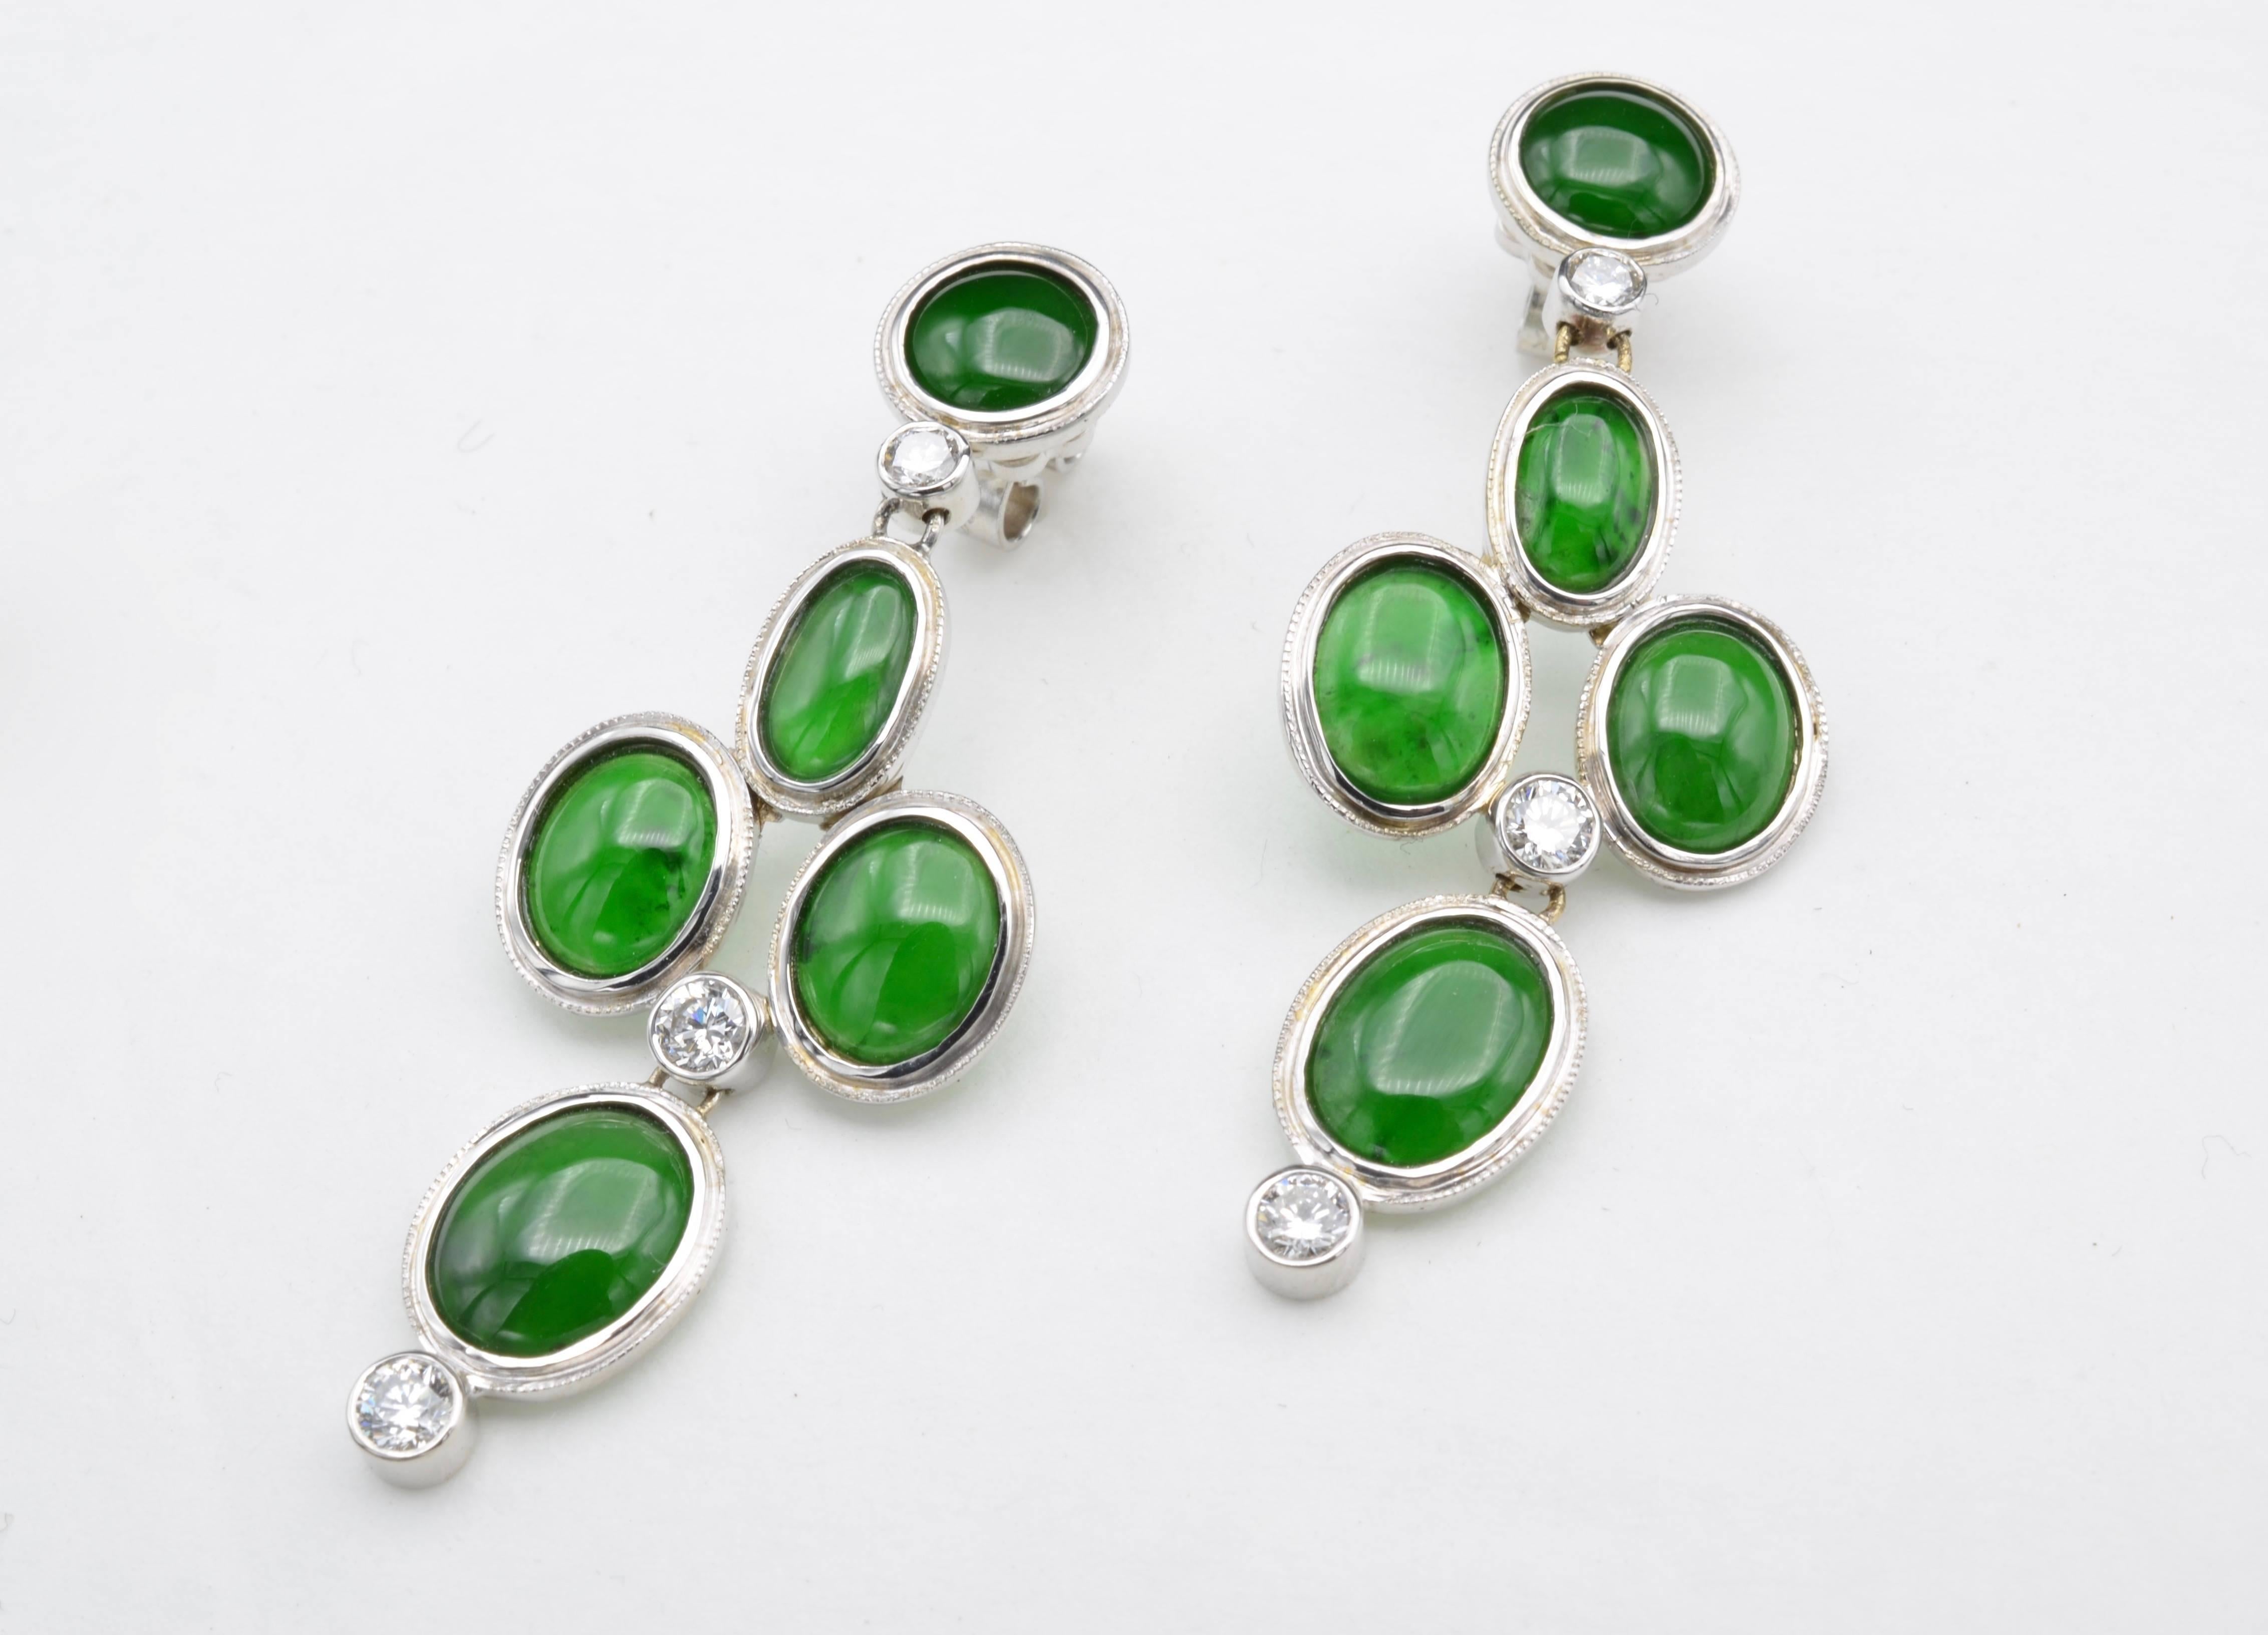 Women's Oval Green Jadeite Earrings with Round Diamonds in White Gold